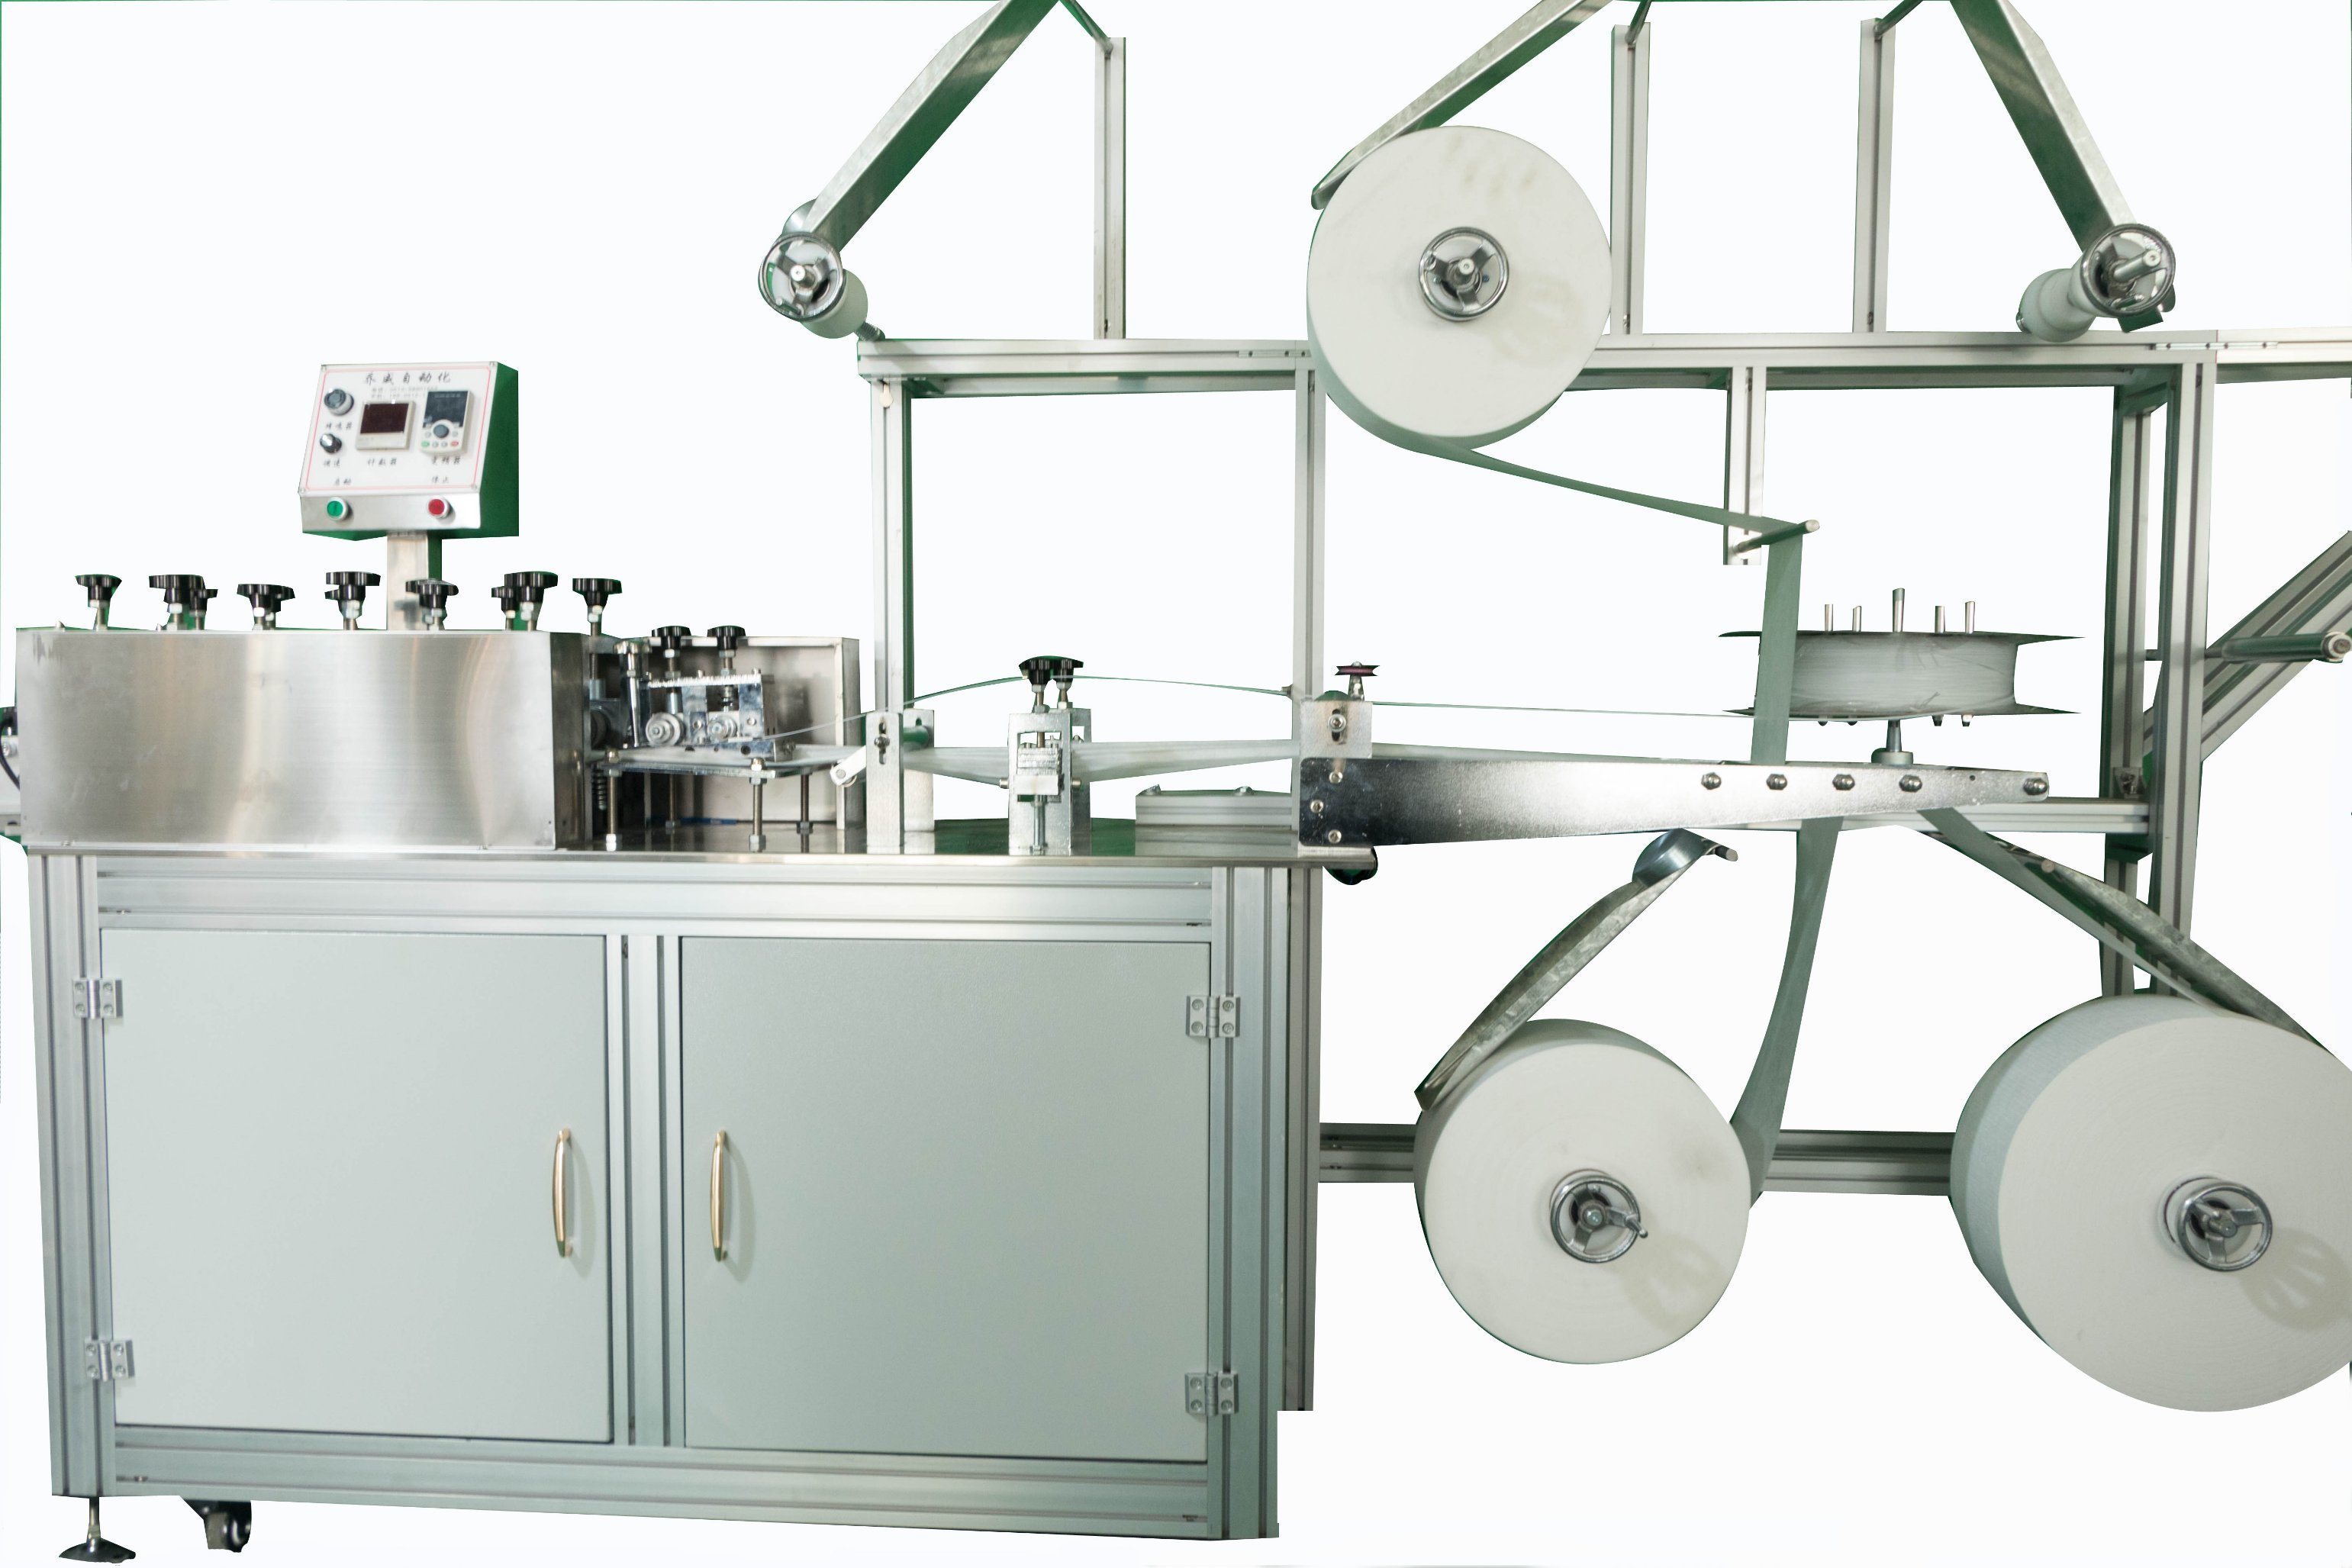 Flat Body Mask Making Machine Apply to The Free-Dust Environment (Practical Type)